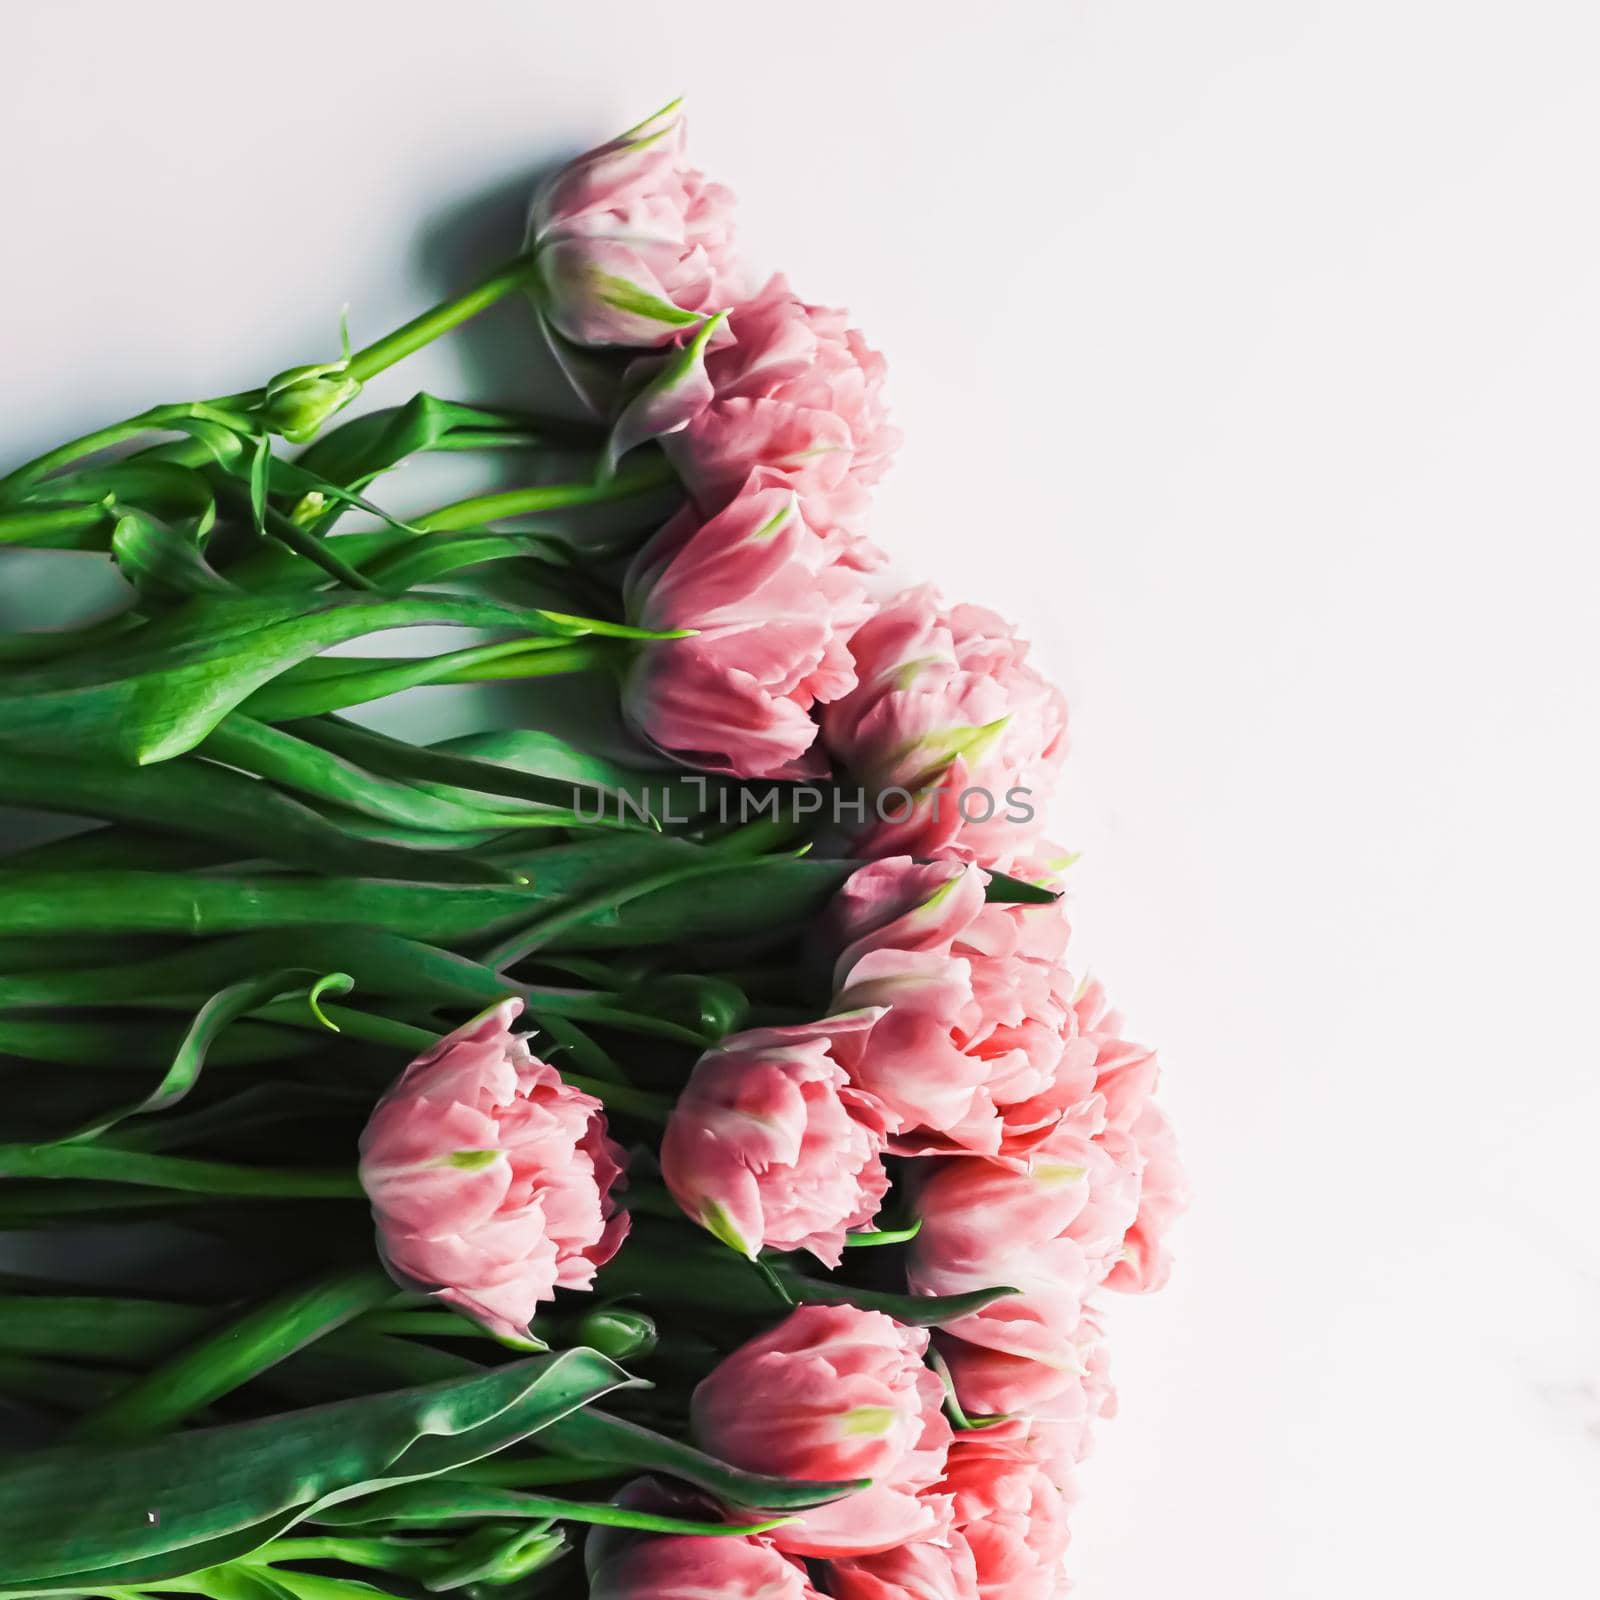 Spring flowers on marble background as holiday gift, greeting card and floral flatlay concept